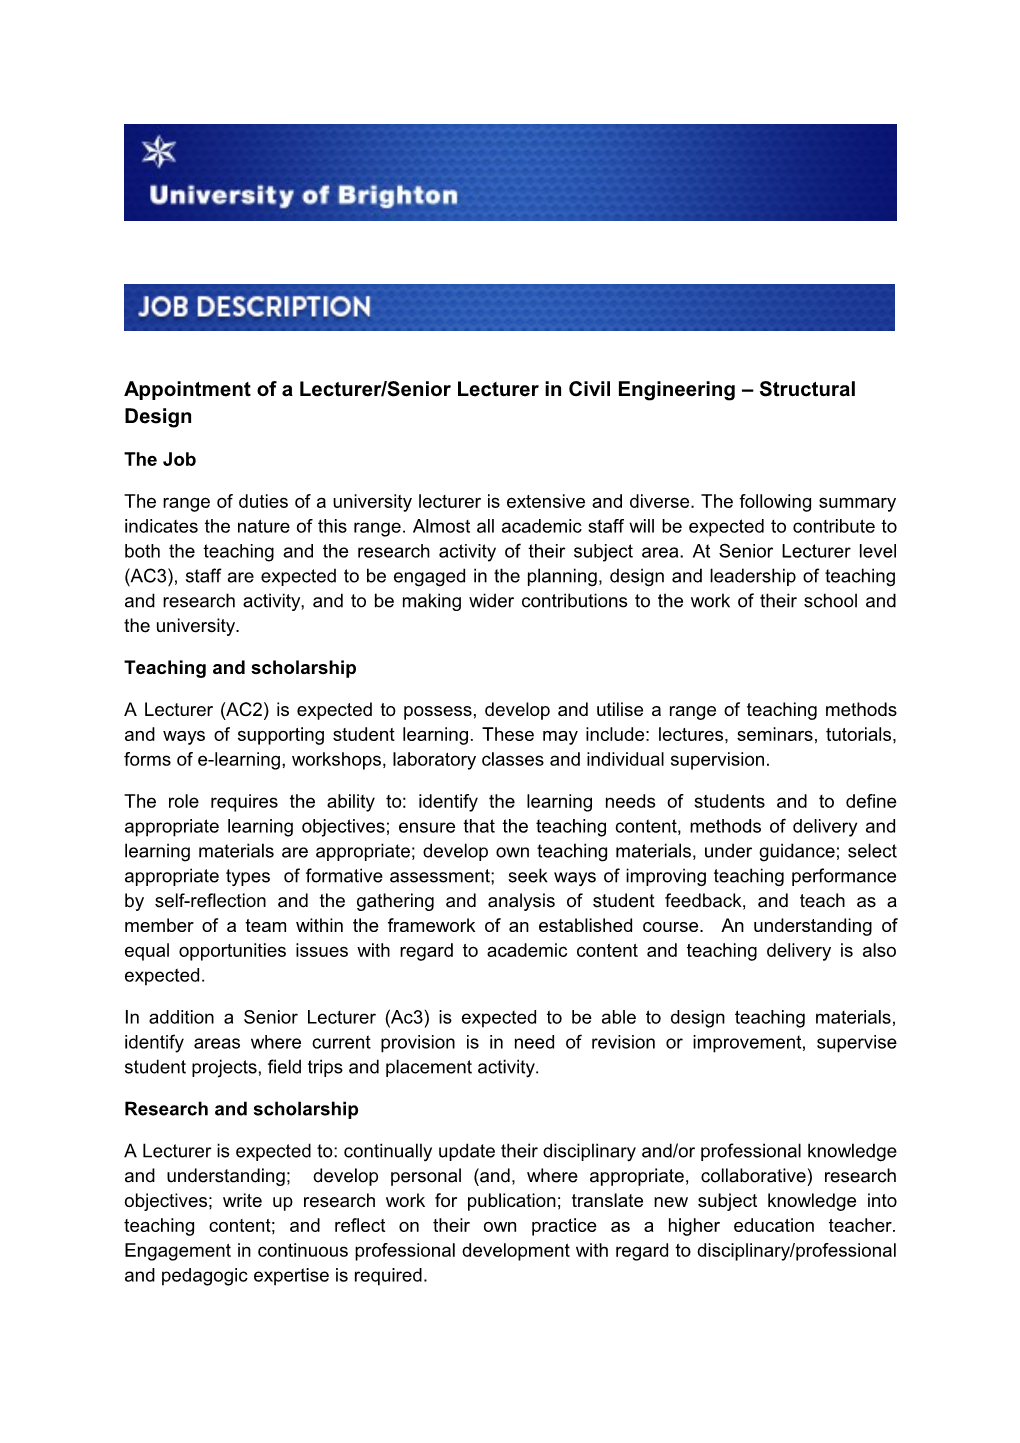 Appointment of a Lecturer/Senior Lecturer in Civil Engineering Structural Design